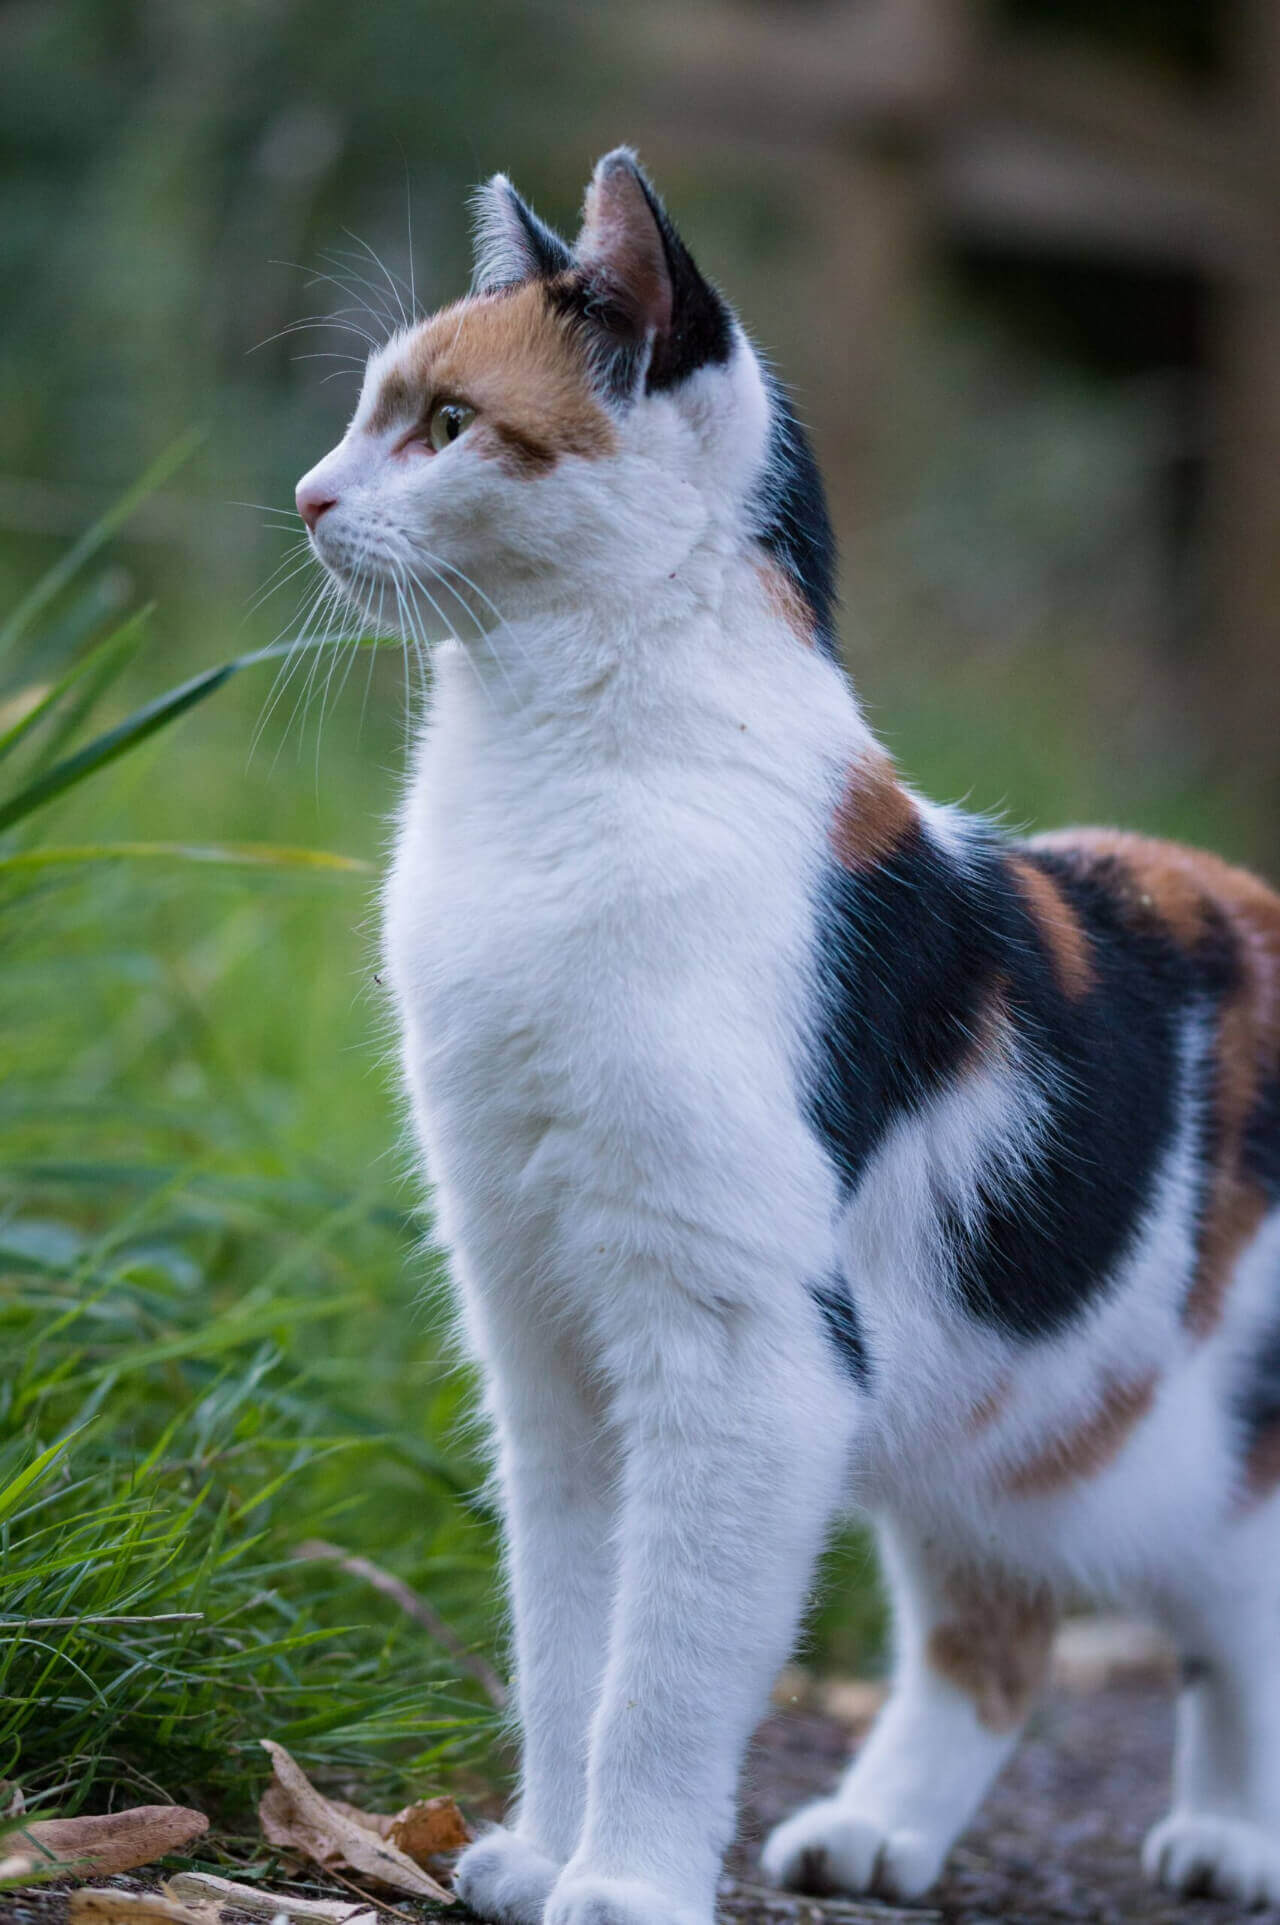 A cat standing on the road beside the grass